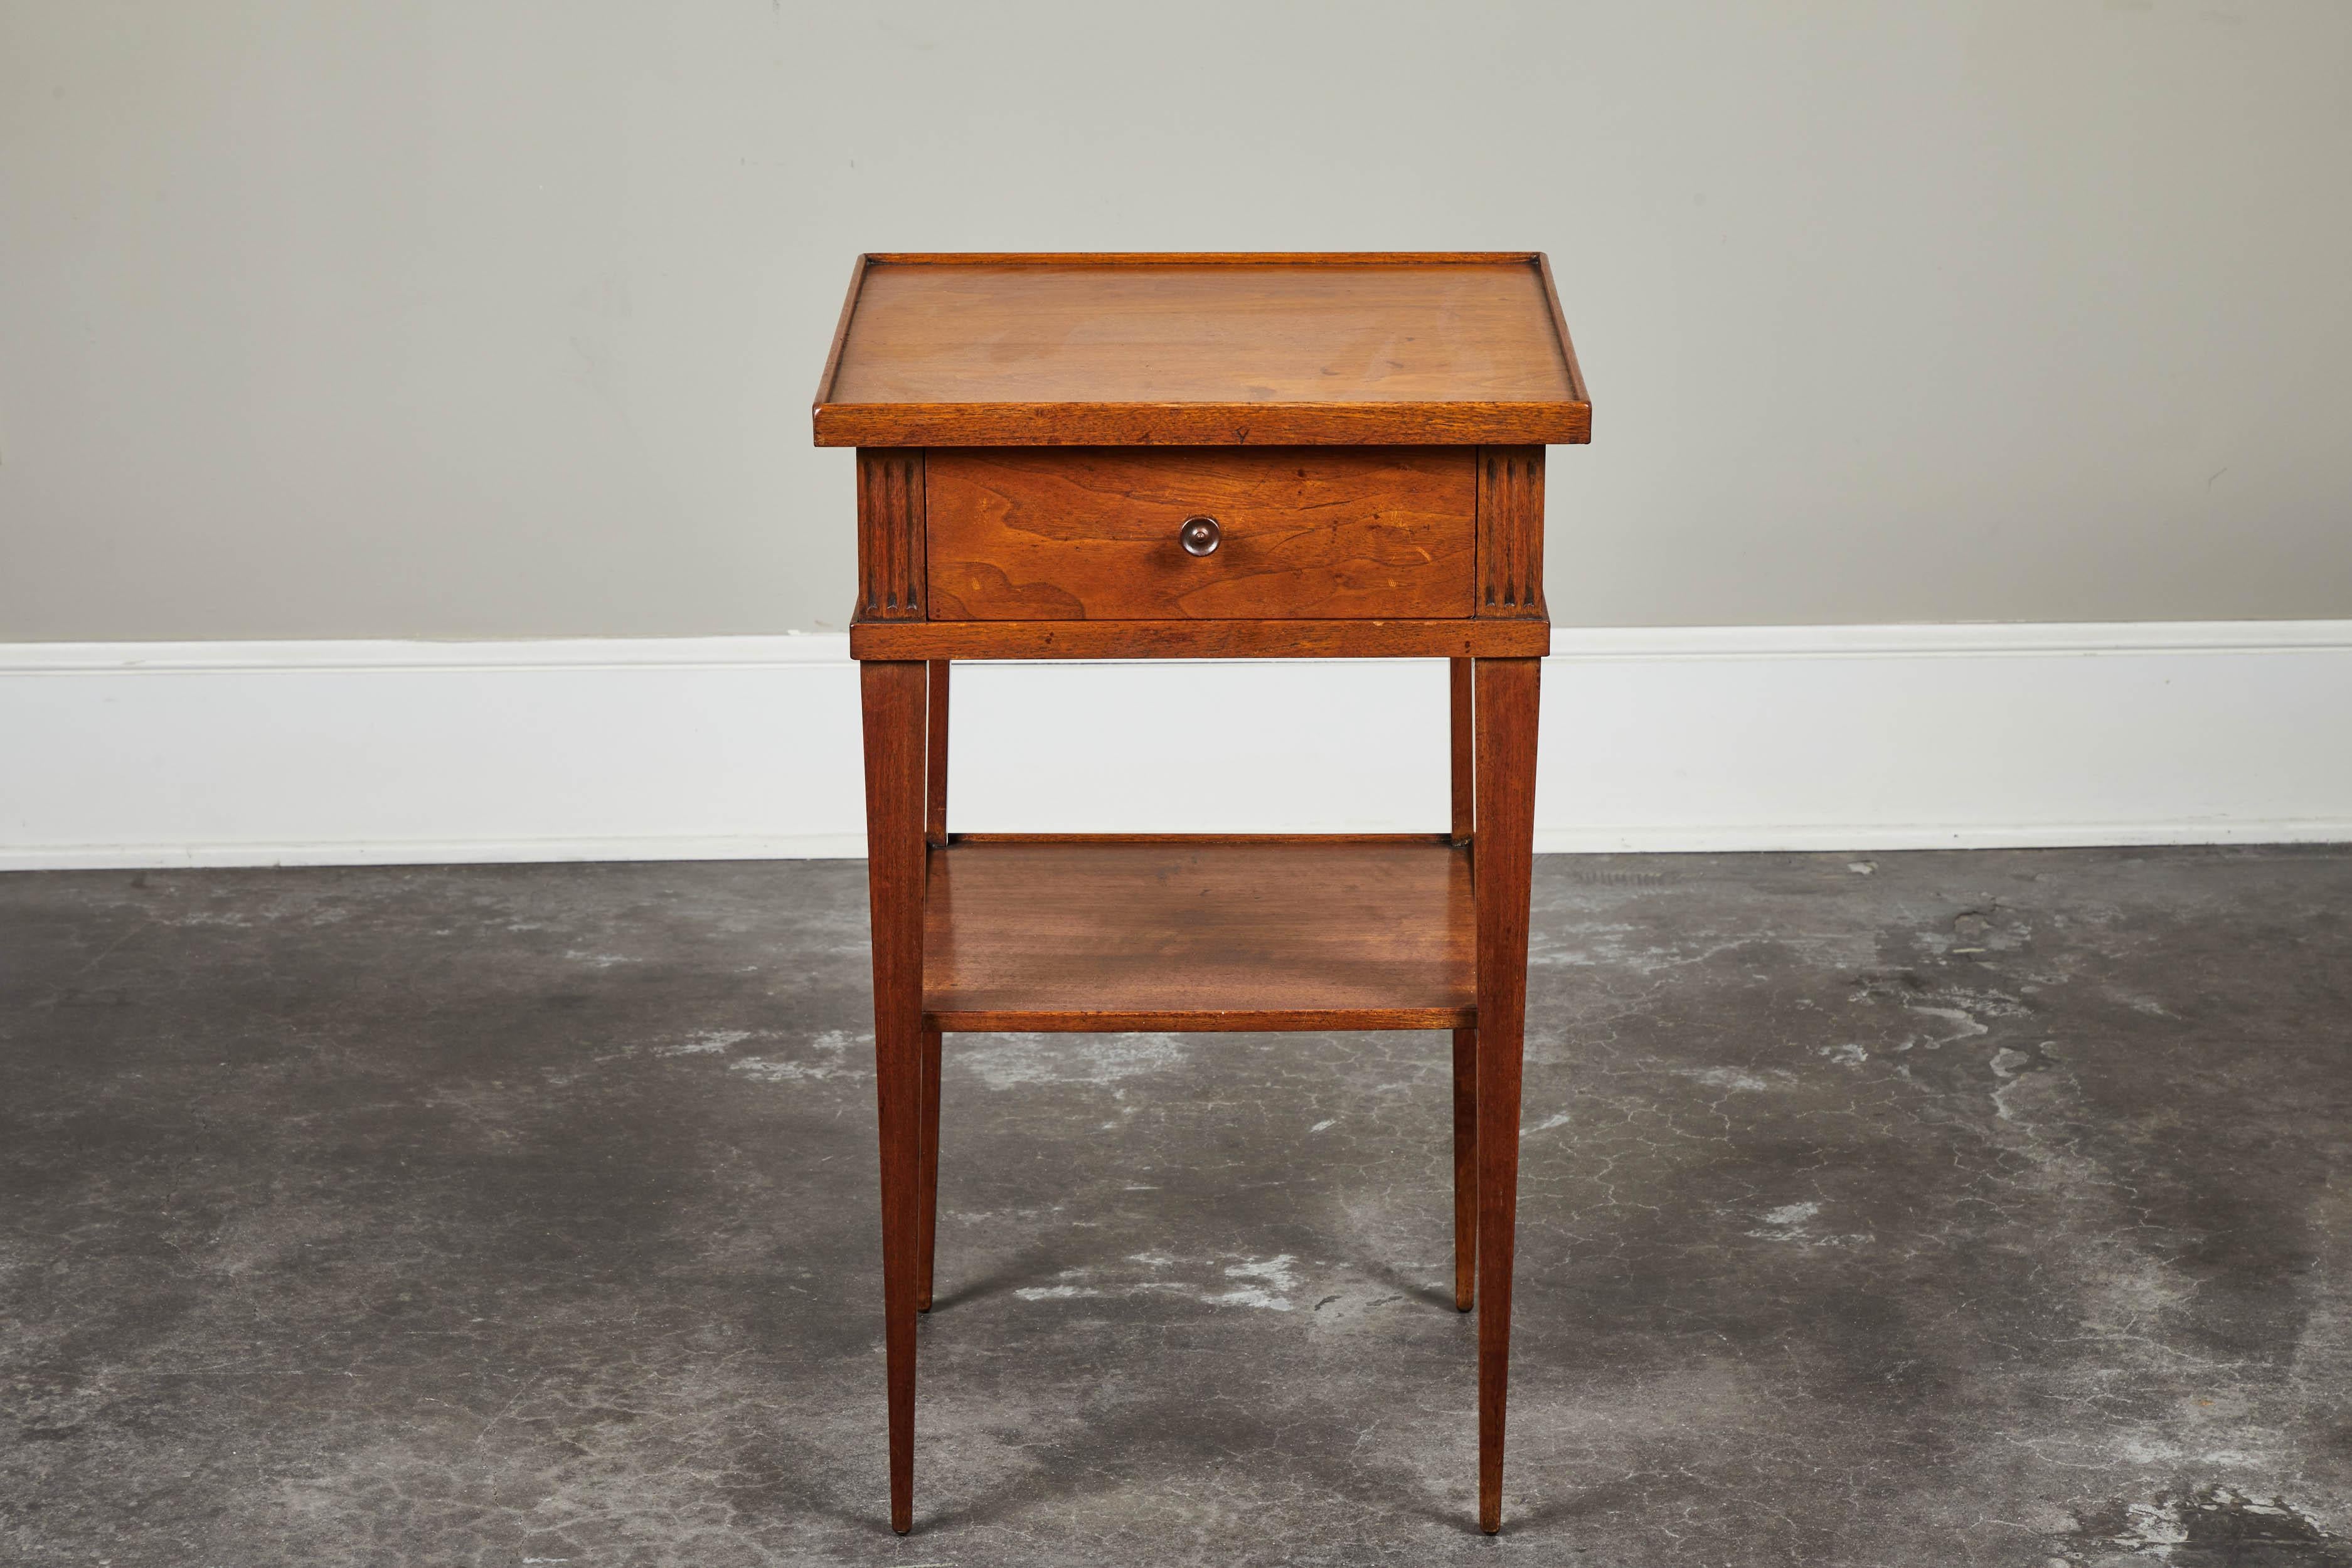 A mid-20th century French walnut Empire inspired side table, with a single-drawer lined with vintage wallpaper.